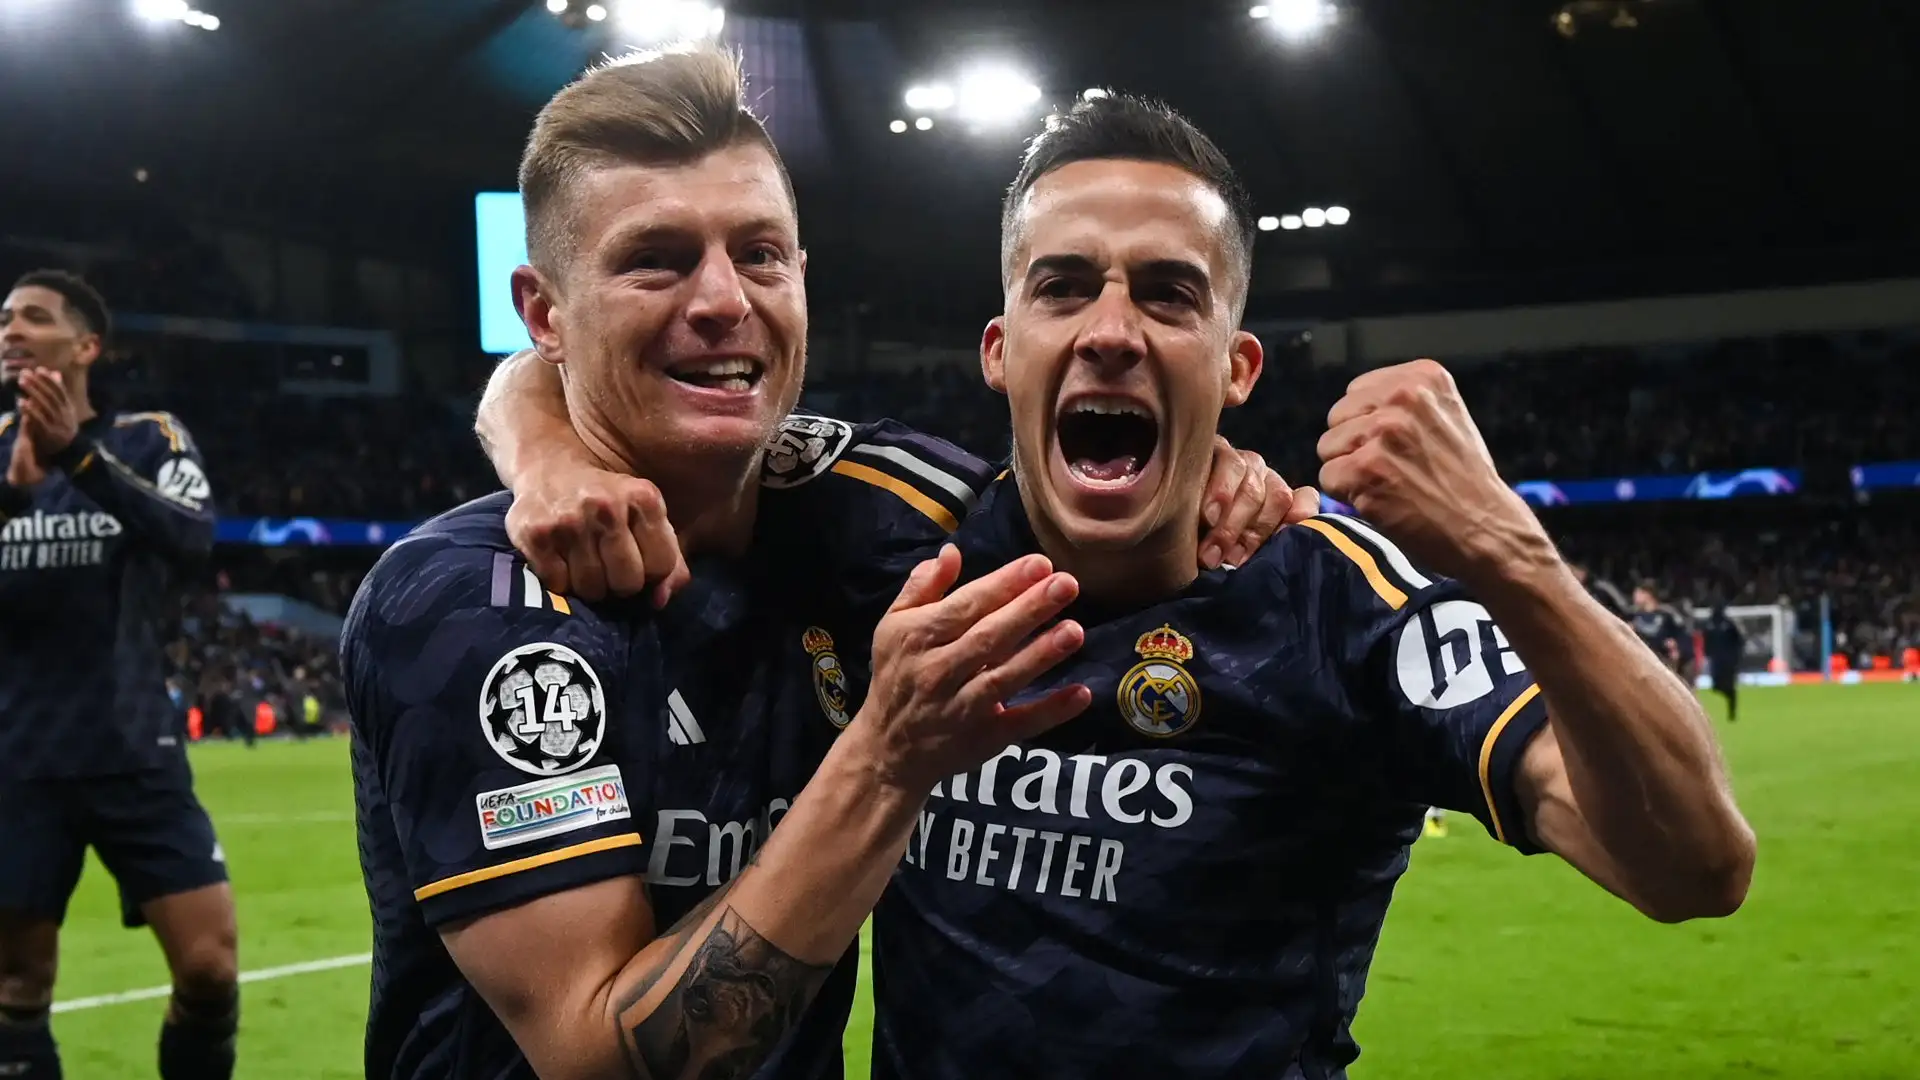 Toni Kroos retirement bombshell prompts surprising X-rated response from Real Madrid team-mate Lucas Vazquez